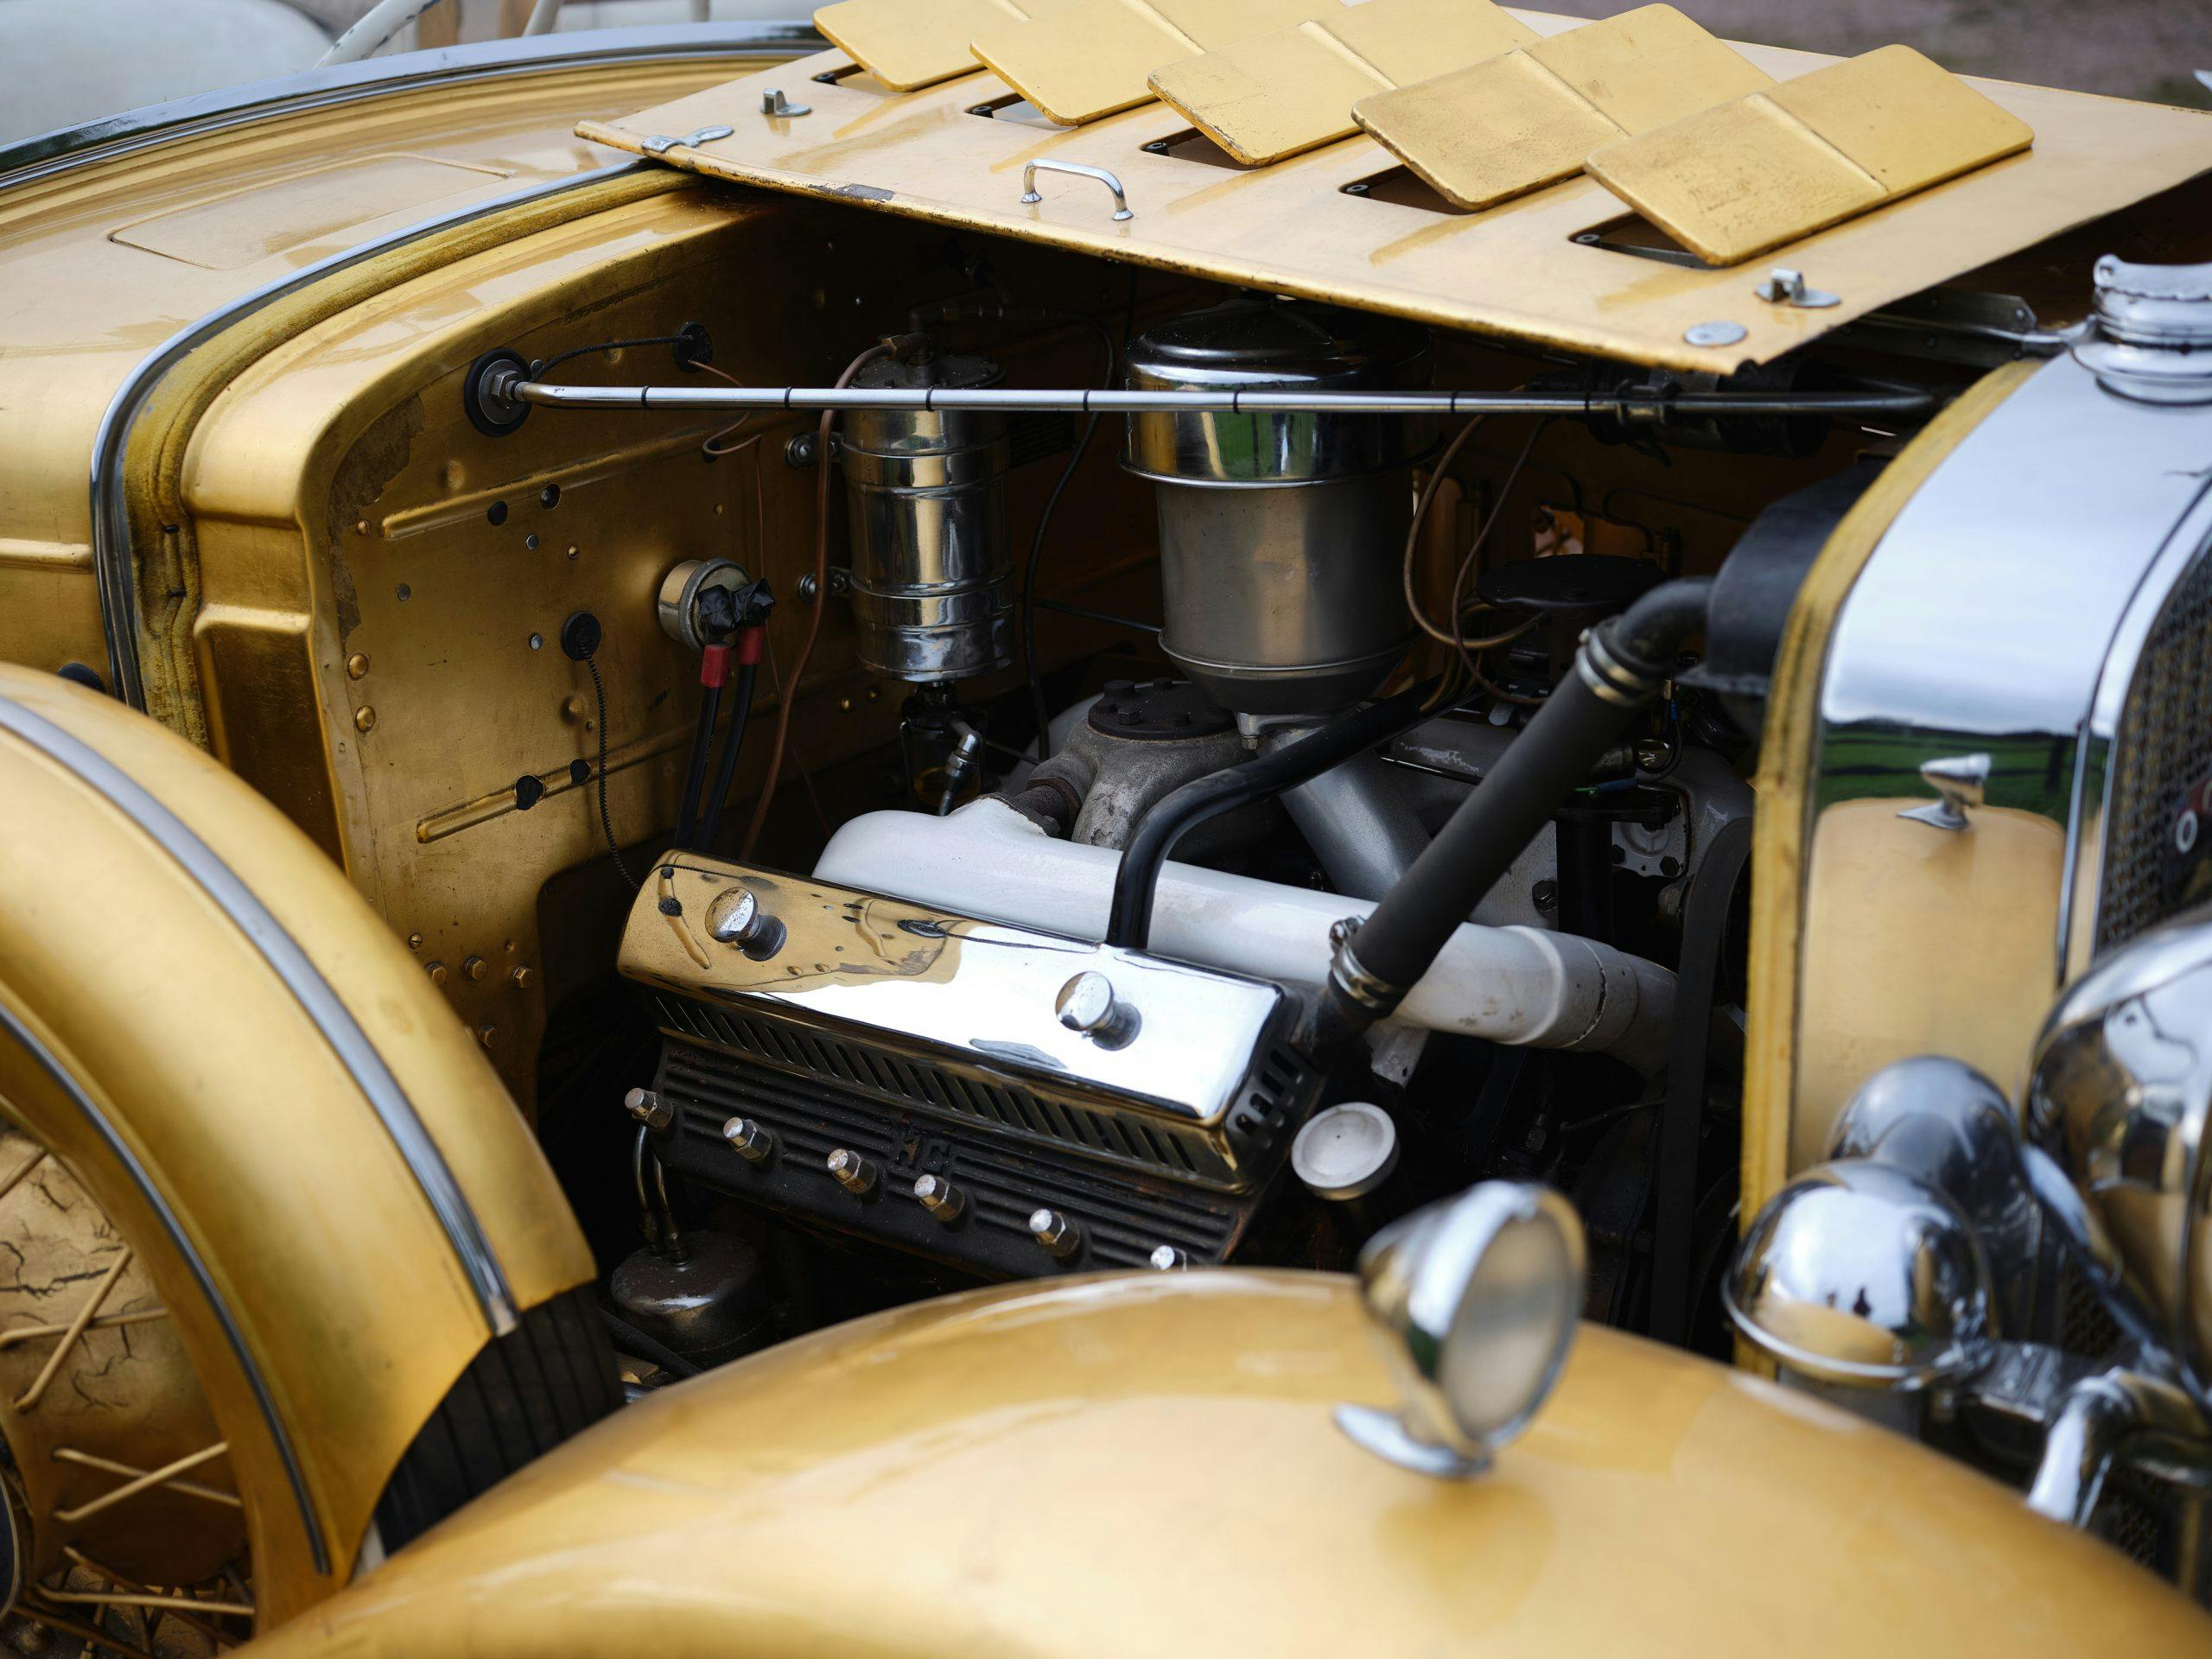 1931 Cadillac V-8 Convertible Coupe engine